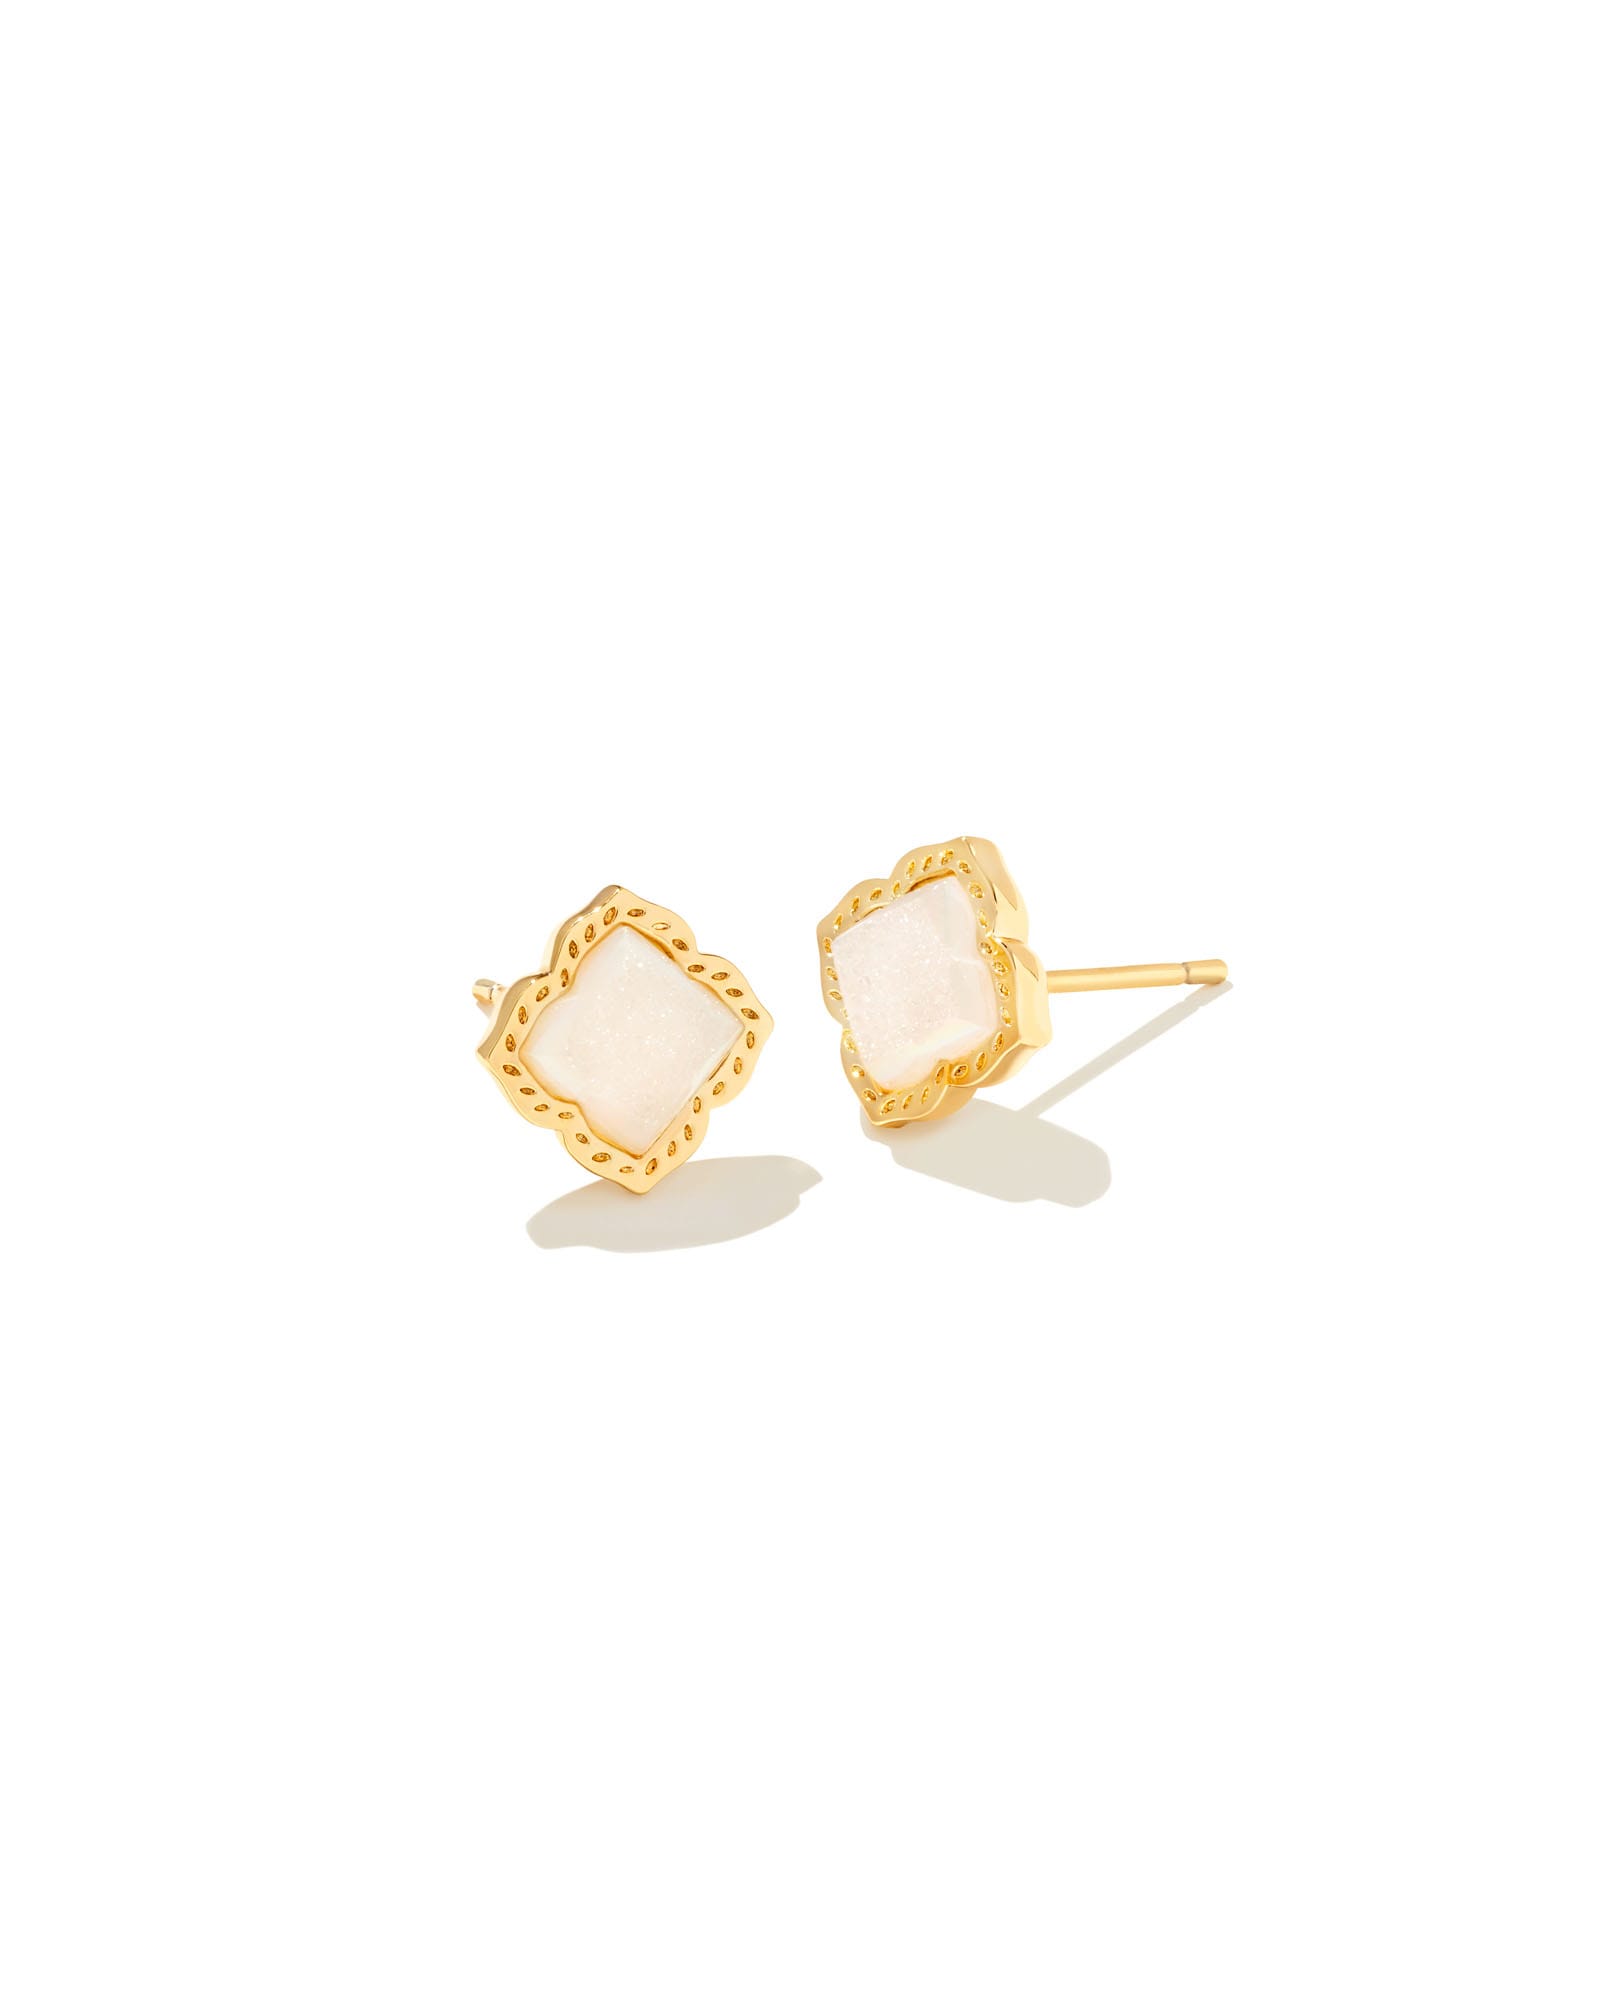 Mallory Gold Stud Earrings in Iridescent Drusy